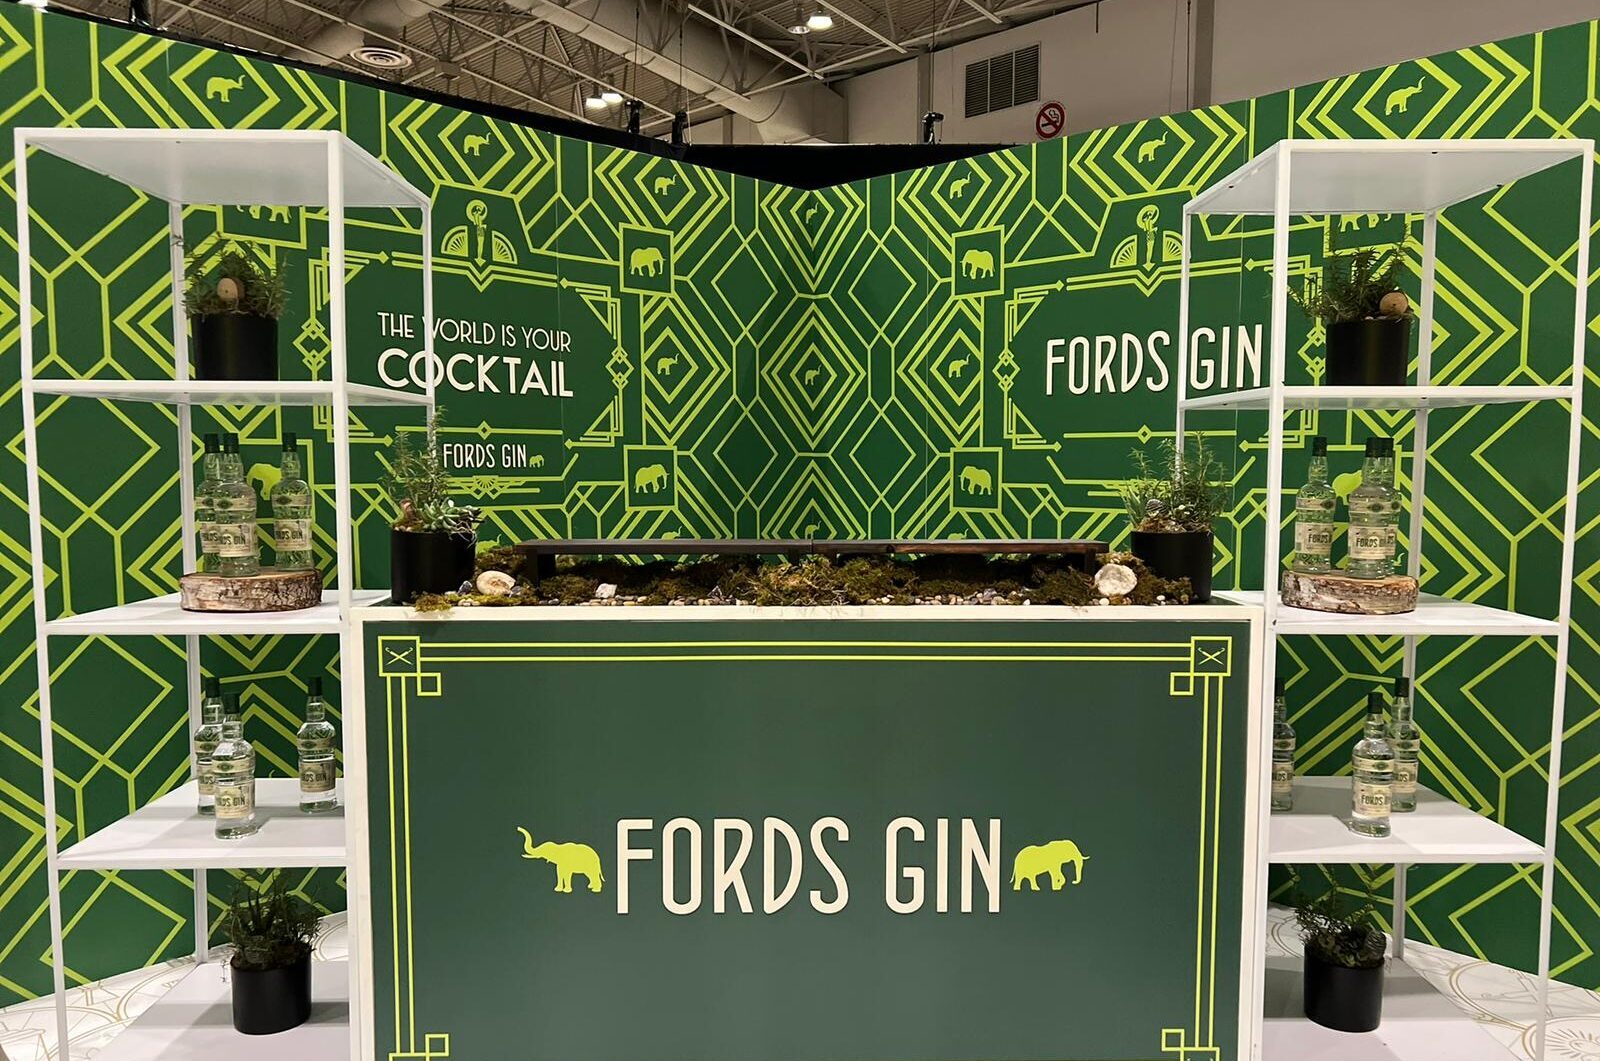 Fords-gin-4